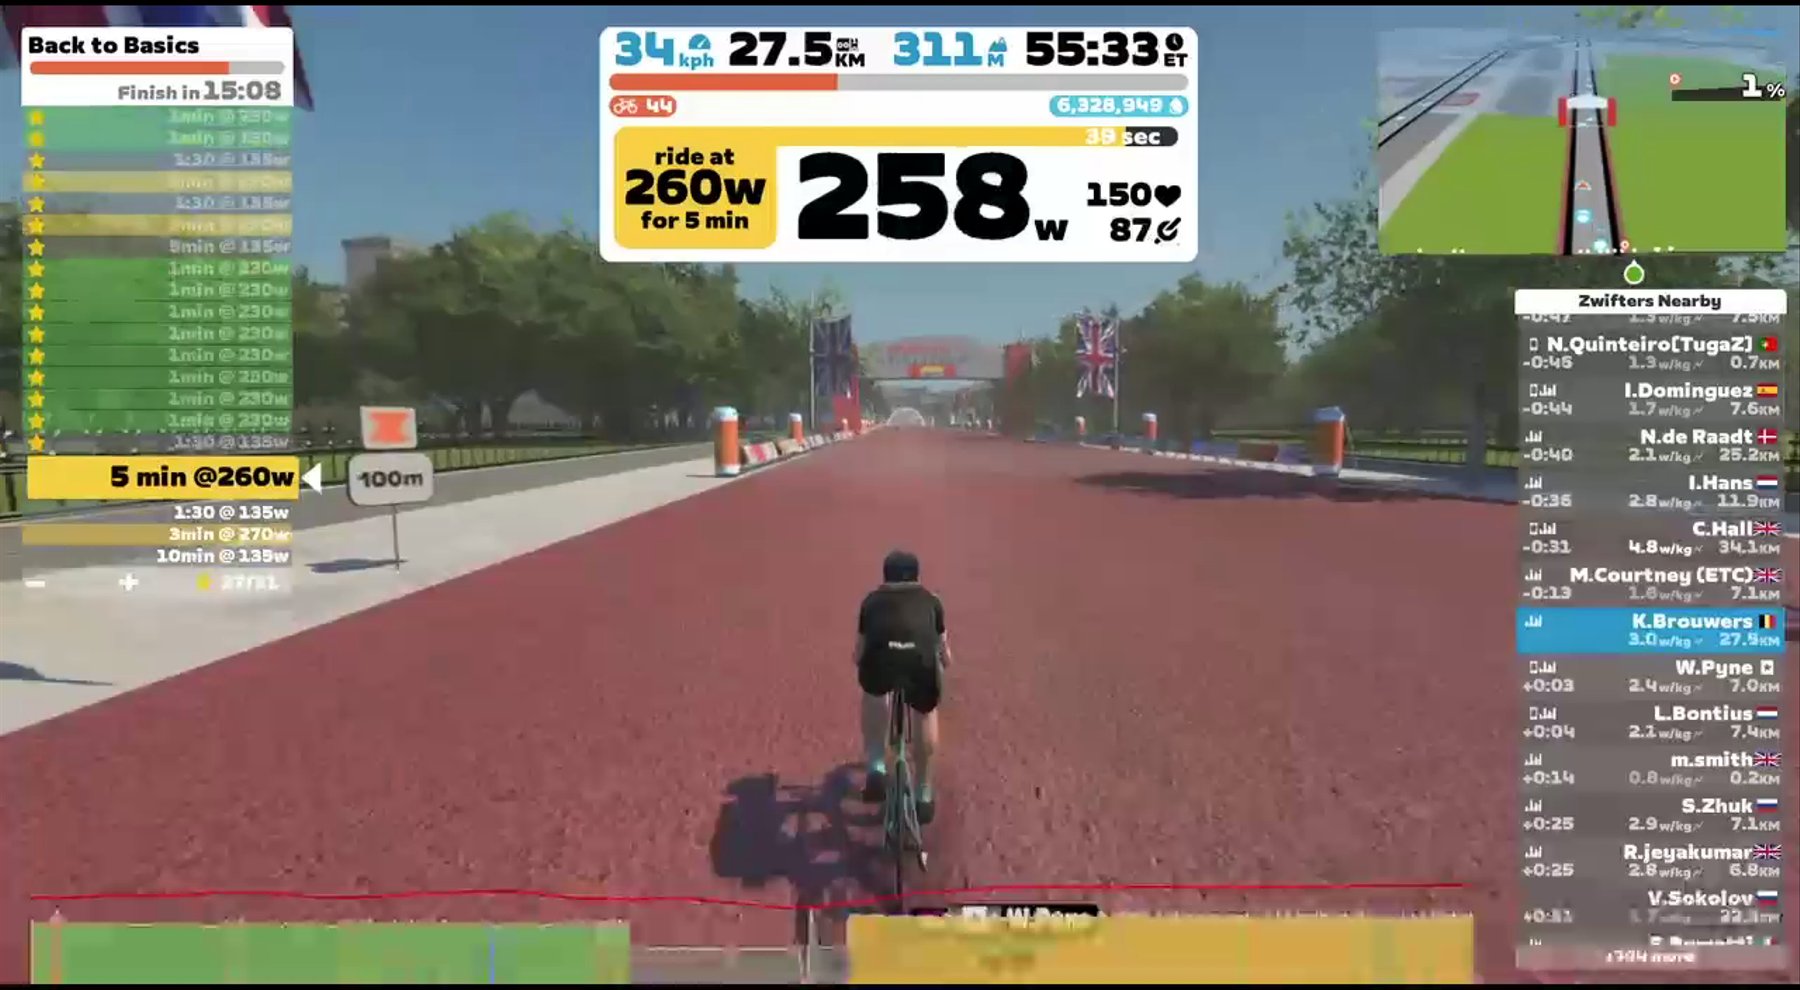 Zwift - Back to Basics in London